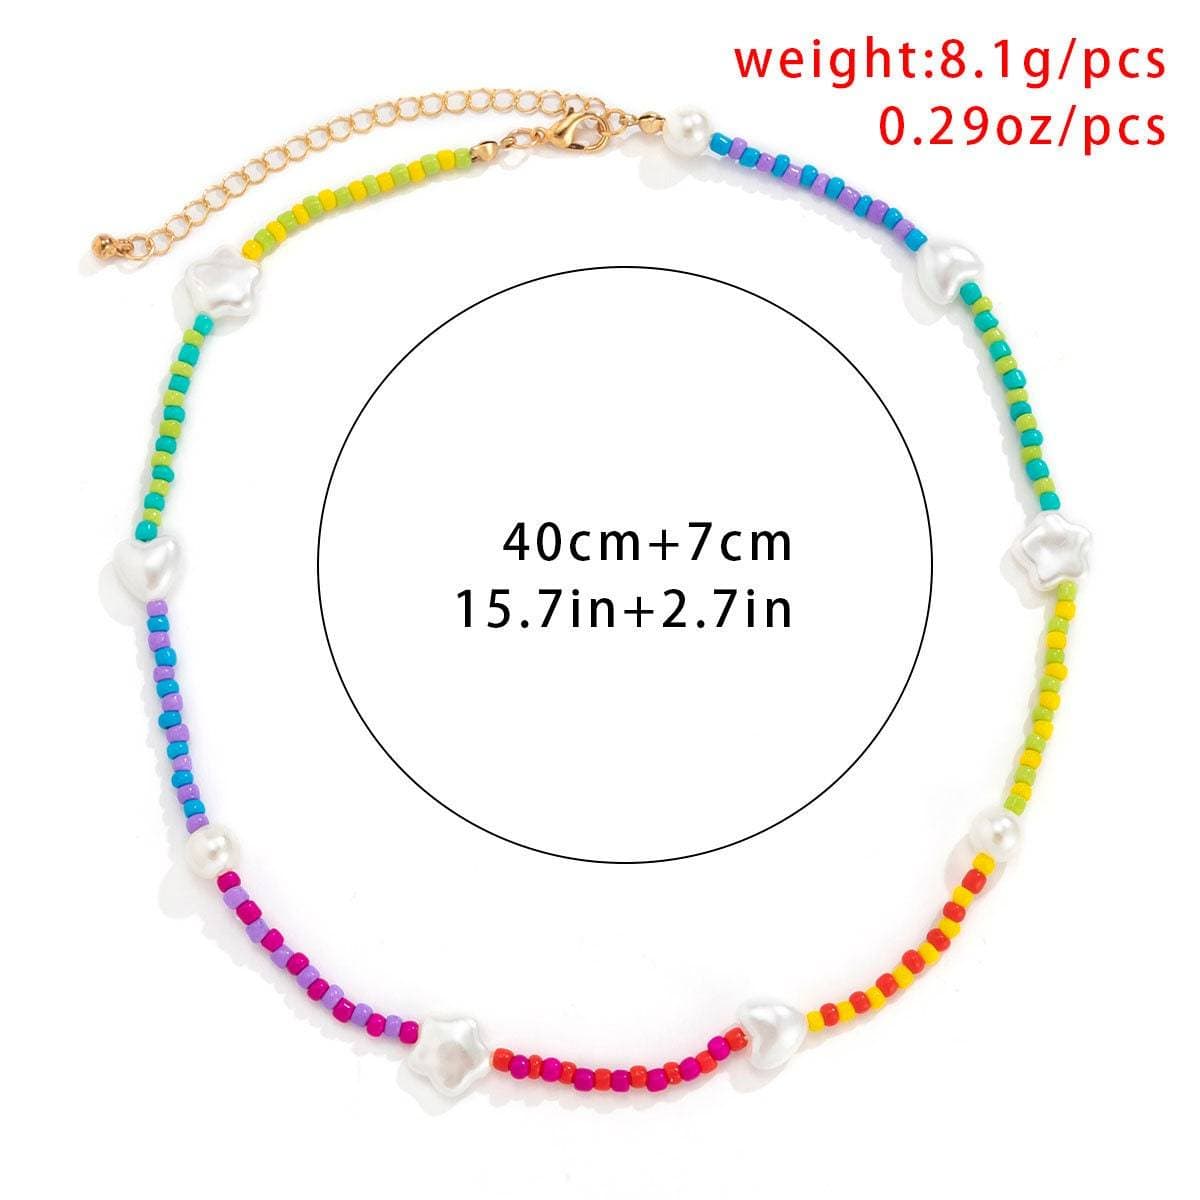 Chic Colorful Seed Bead Star Heart Pearl Charm Choker Necklace - ArtGalleryZen